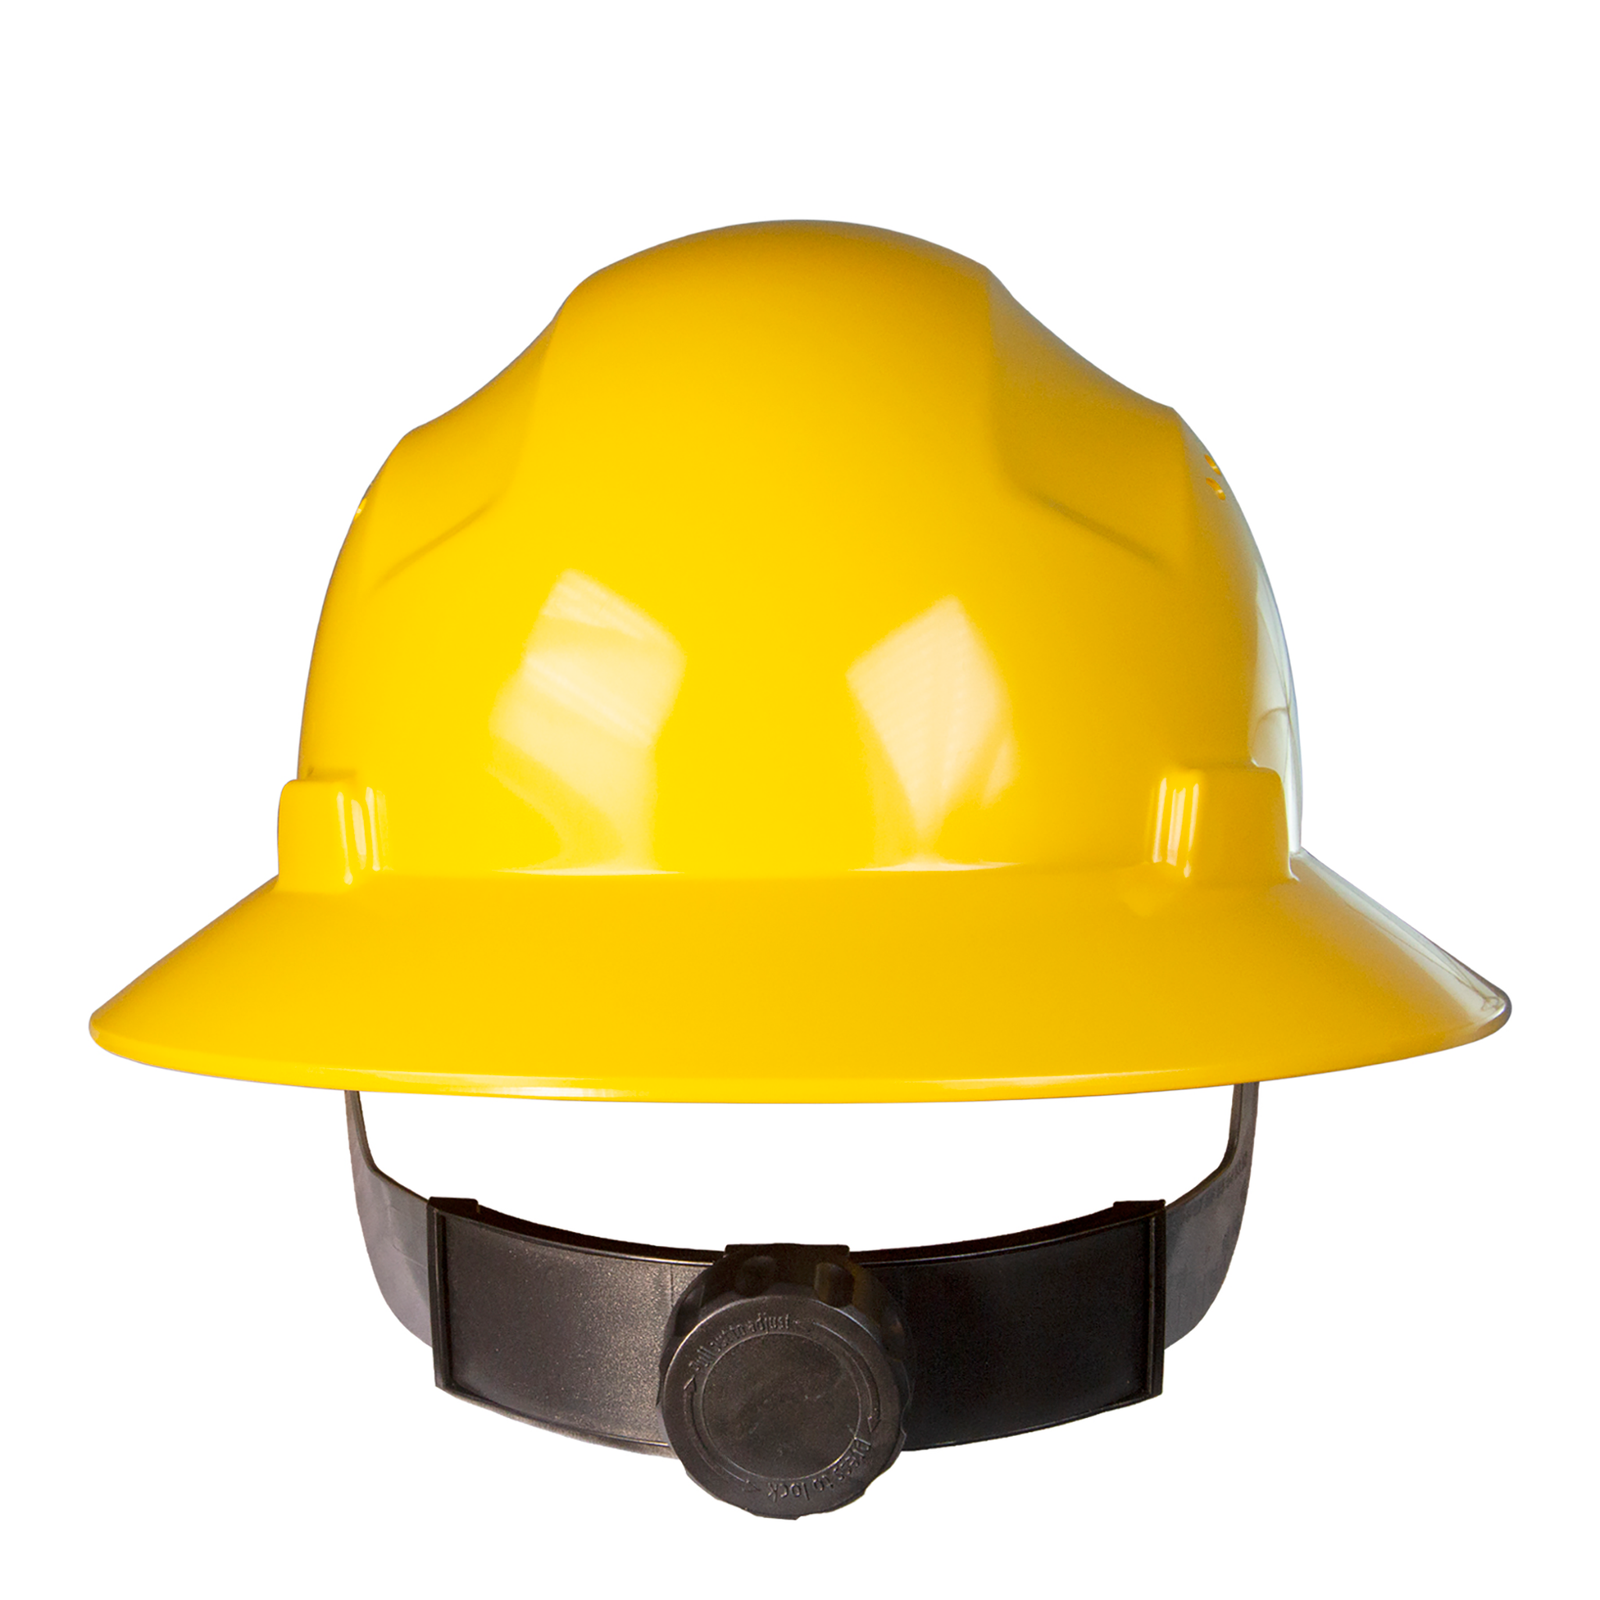 Full brim yellow safety hard hat with 4 point suspension and black ratchet